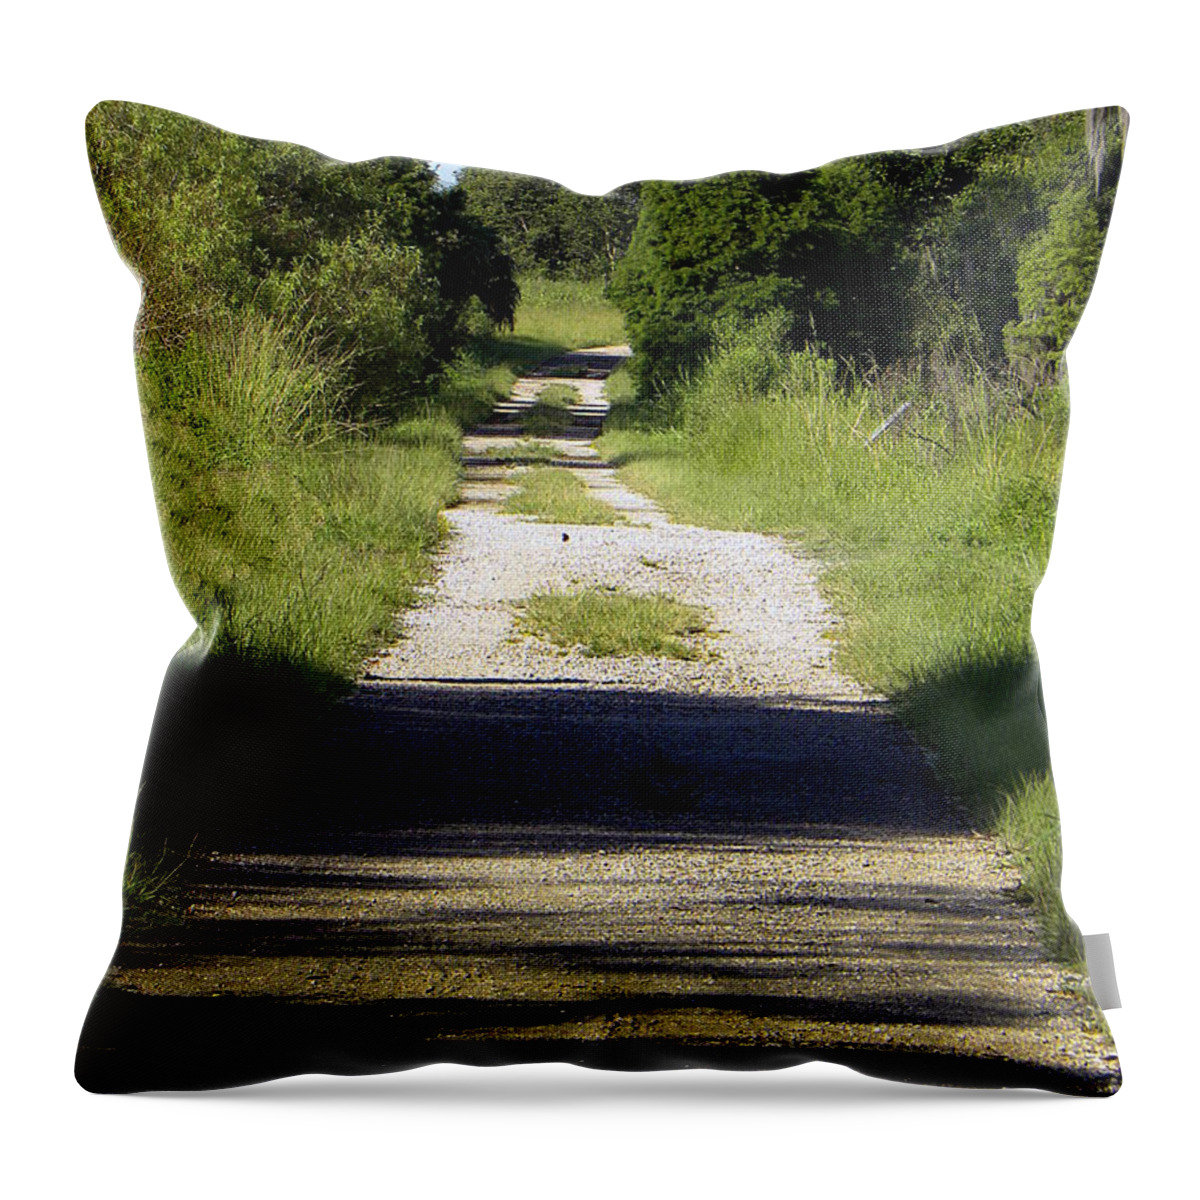 I Took This Landscape Photo Of The Eagle Roost Trail At The Circle B Bar Reserve On July 30 Throw Pillow featuring the photograph Eagle Roost Trail by Christopher Mercer